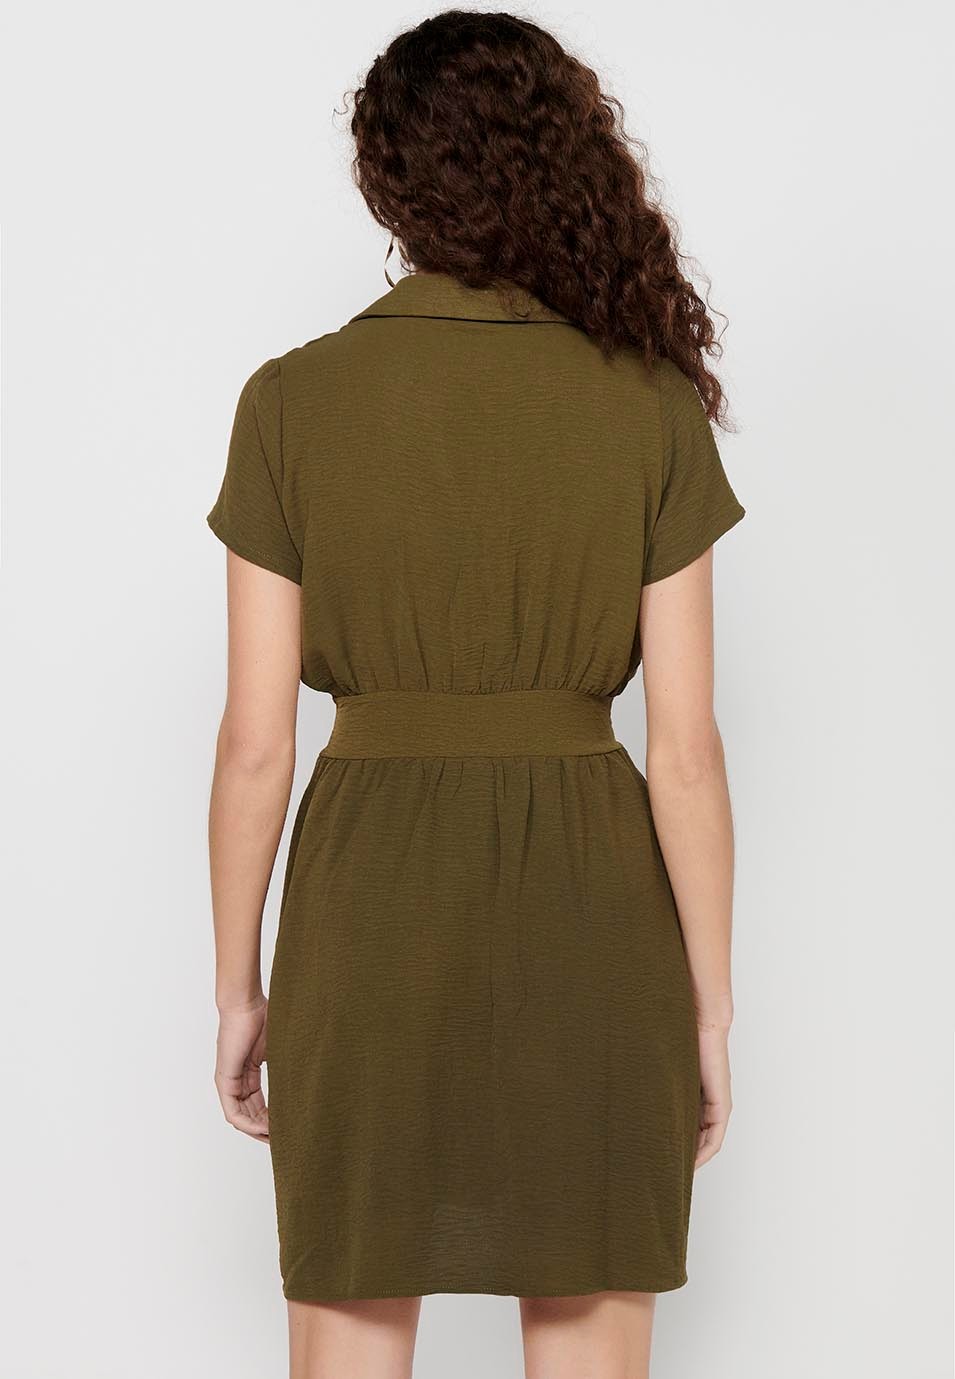 Khaki Short Sleeve Dress with V-Neck and Tight Waist for Women 7